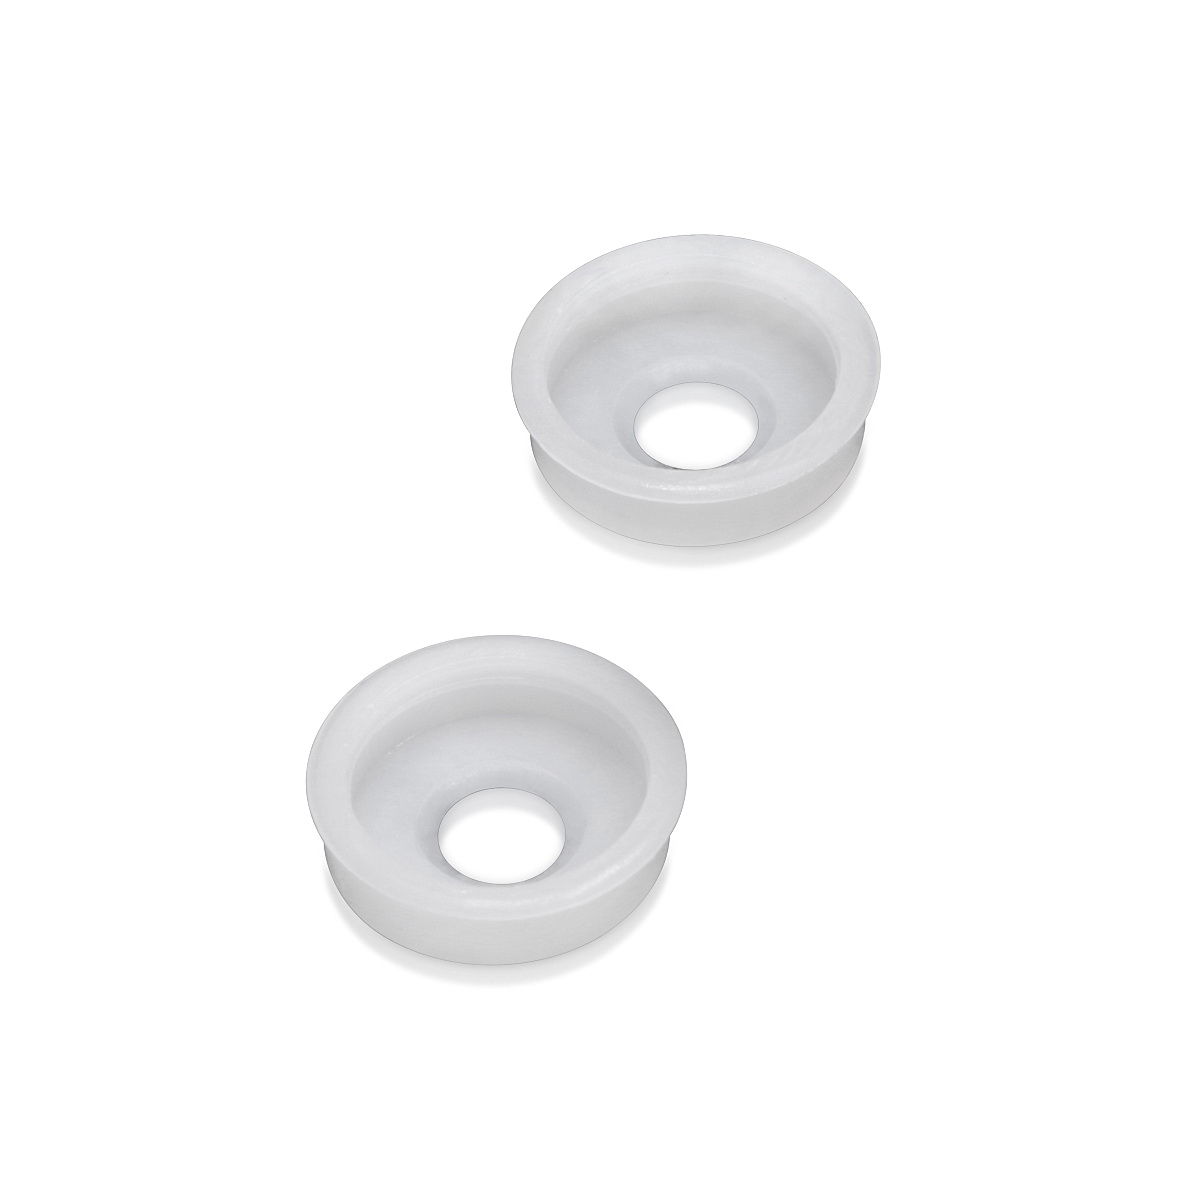 Snap-Cap Washers For Flat Bottom Screw #6 & #8